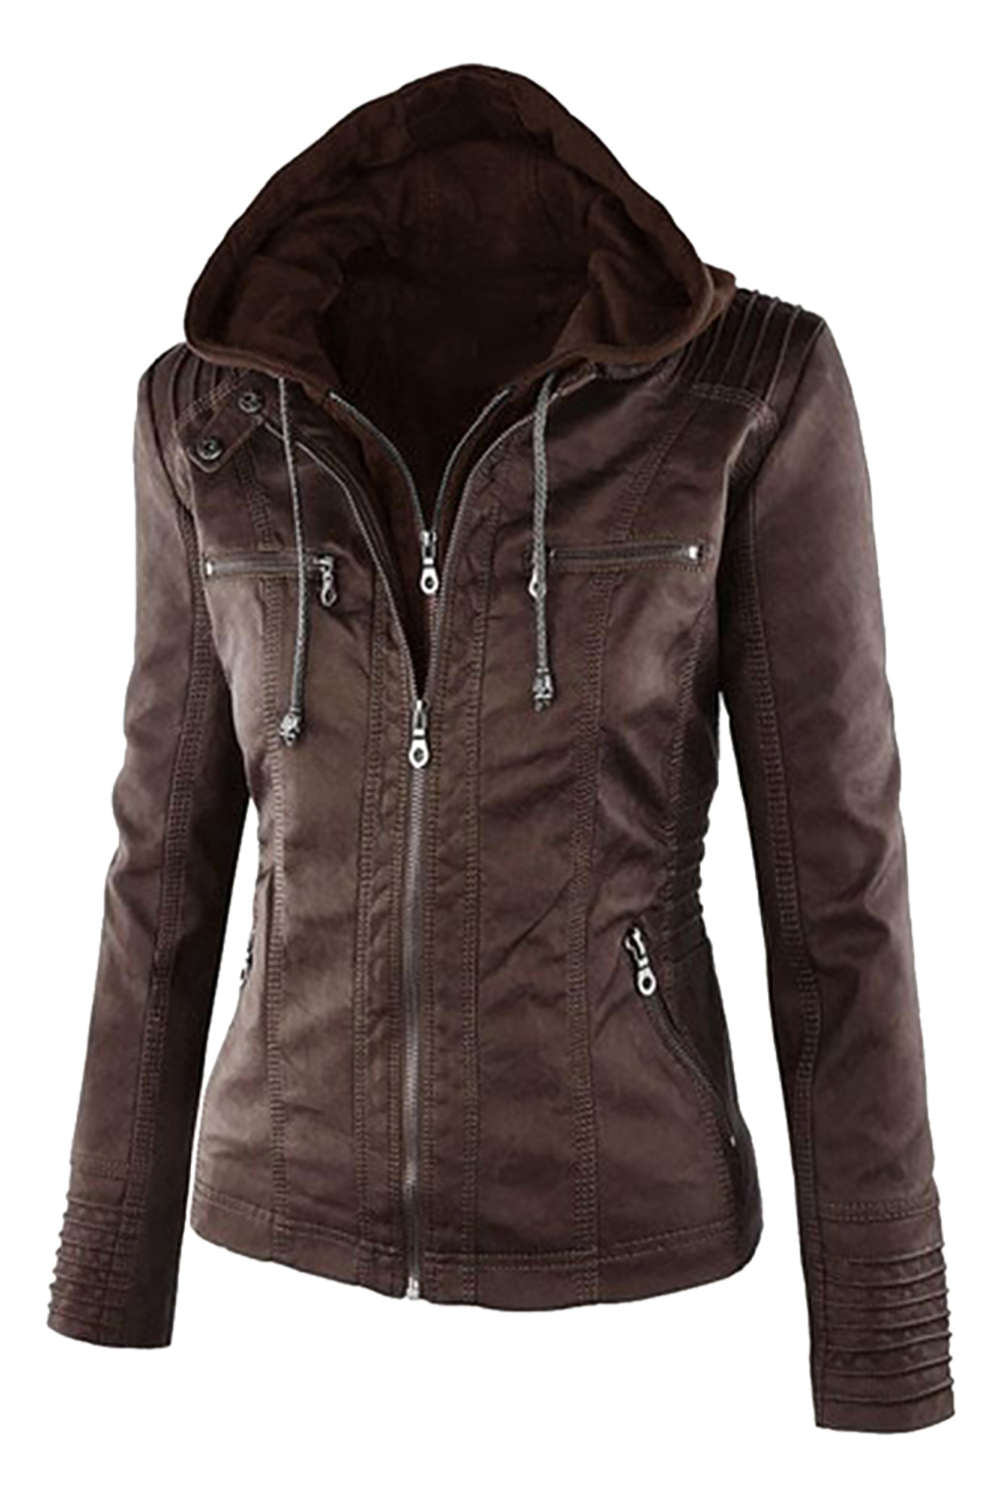 Iyasson Women's  Faux Leather Zip Up Hooded Jacket